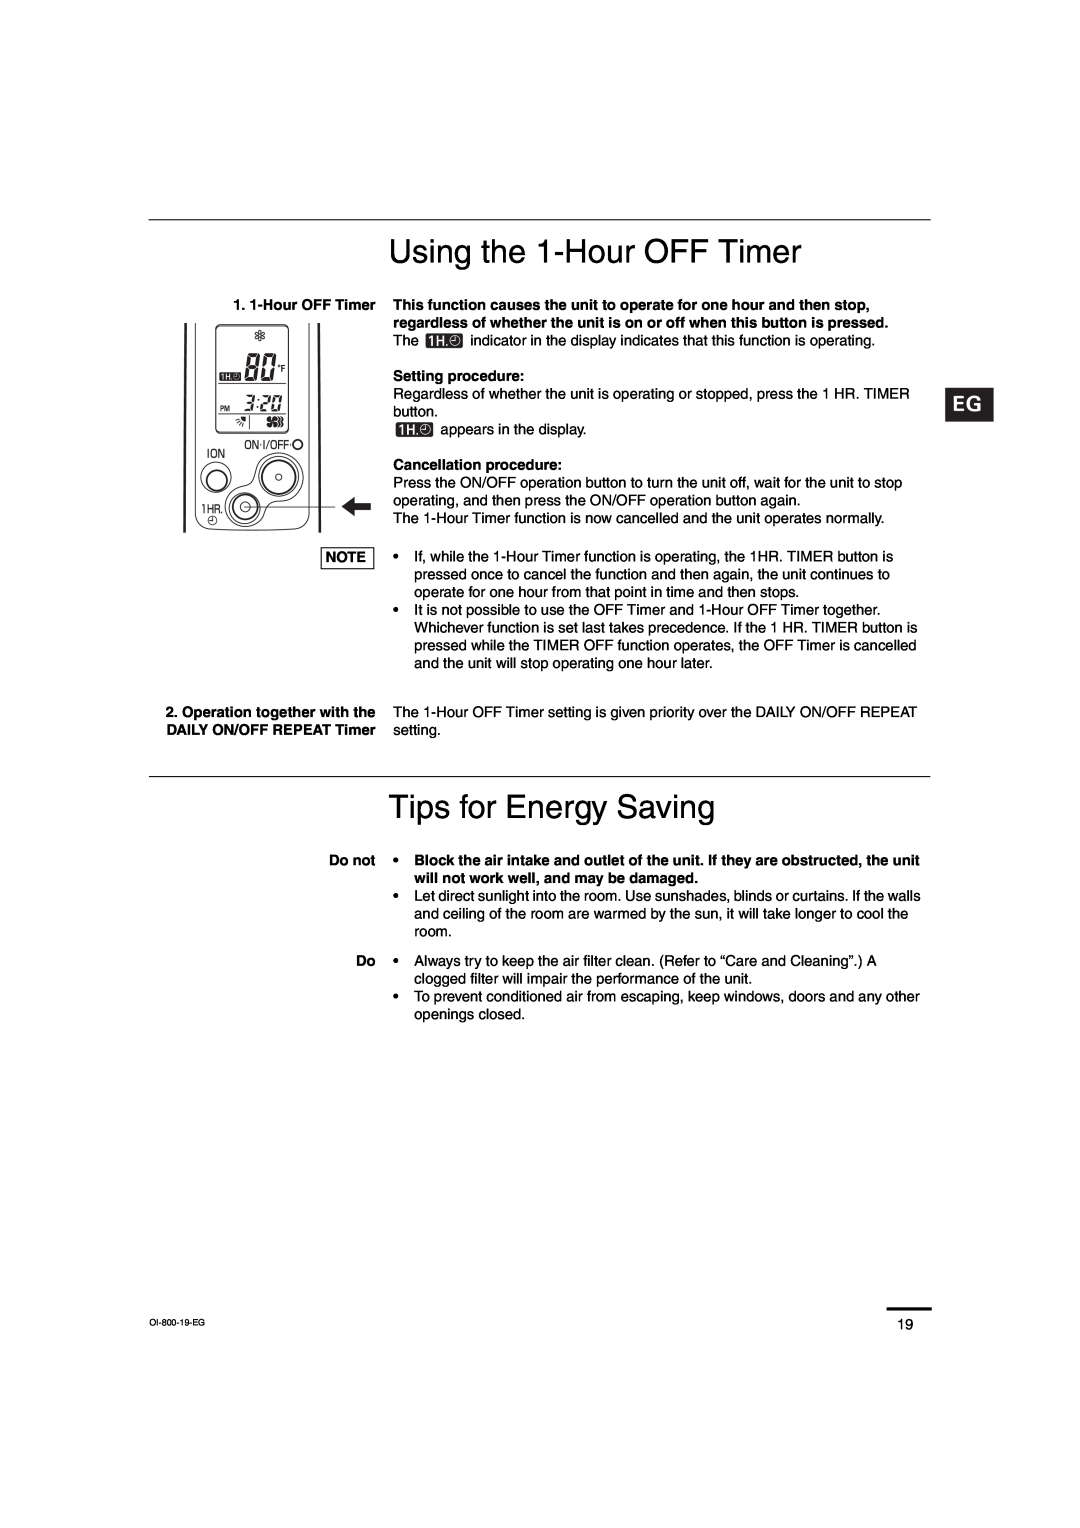 Sanyo CL2472, C2472, C1872, CL1872 service manual Using the 1-HourOFF Timer, Tips for Energy Saving 